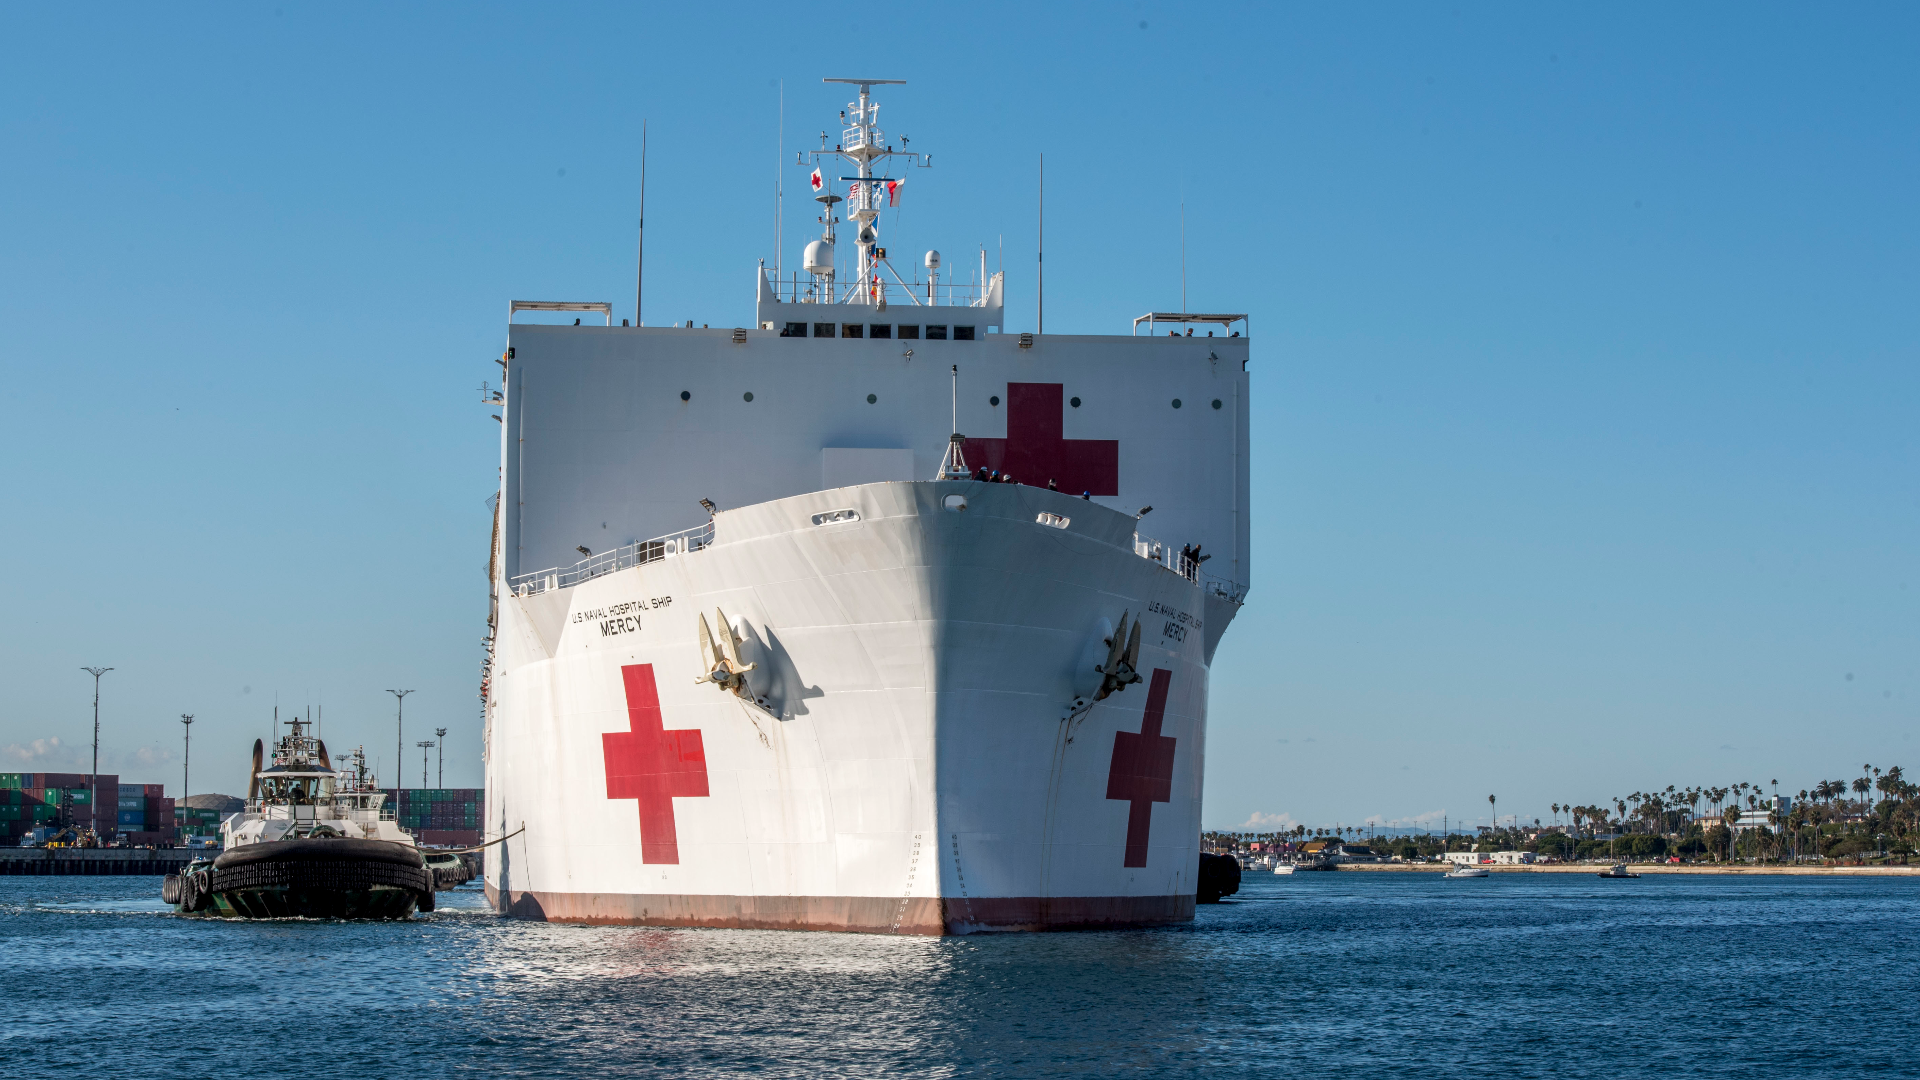 The USNS Comfort will serve as a referral hospital for non-COVID-19 patients currently admitted to shore-based hospitals.